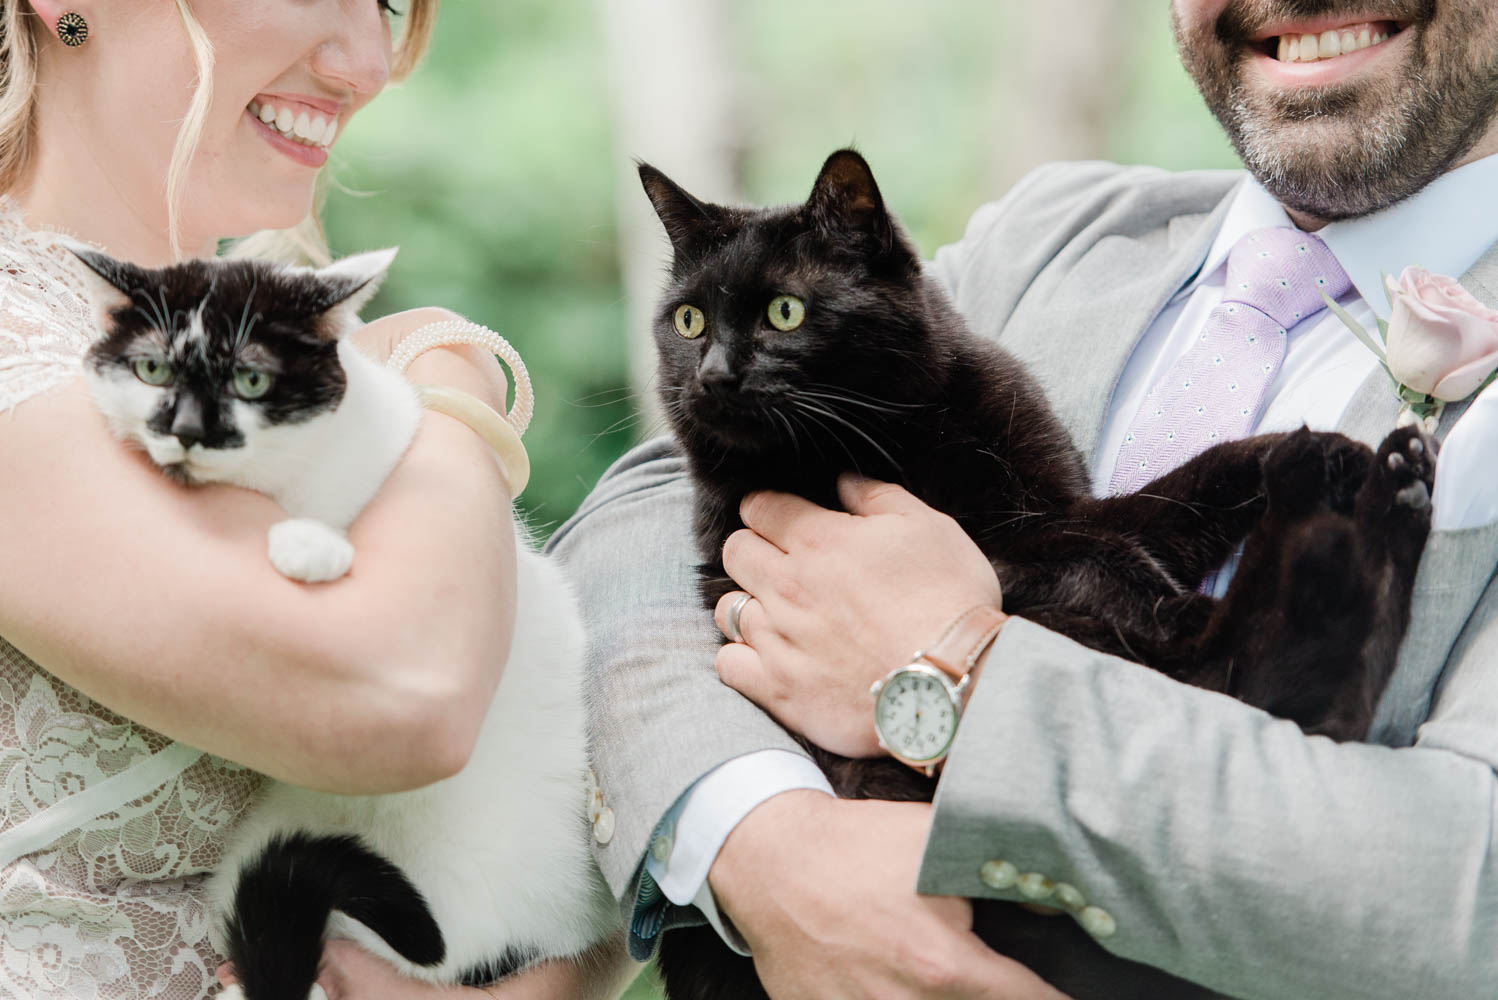 Including their cats in the wedding ceremony.